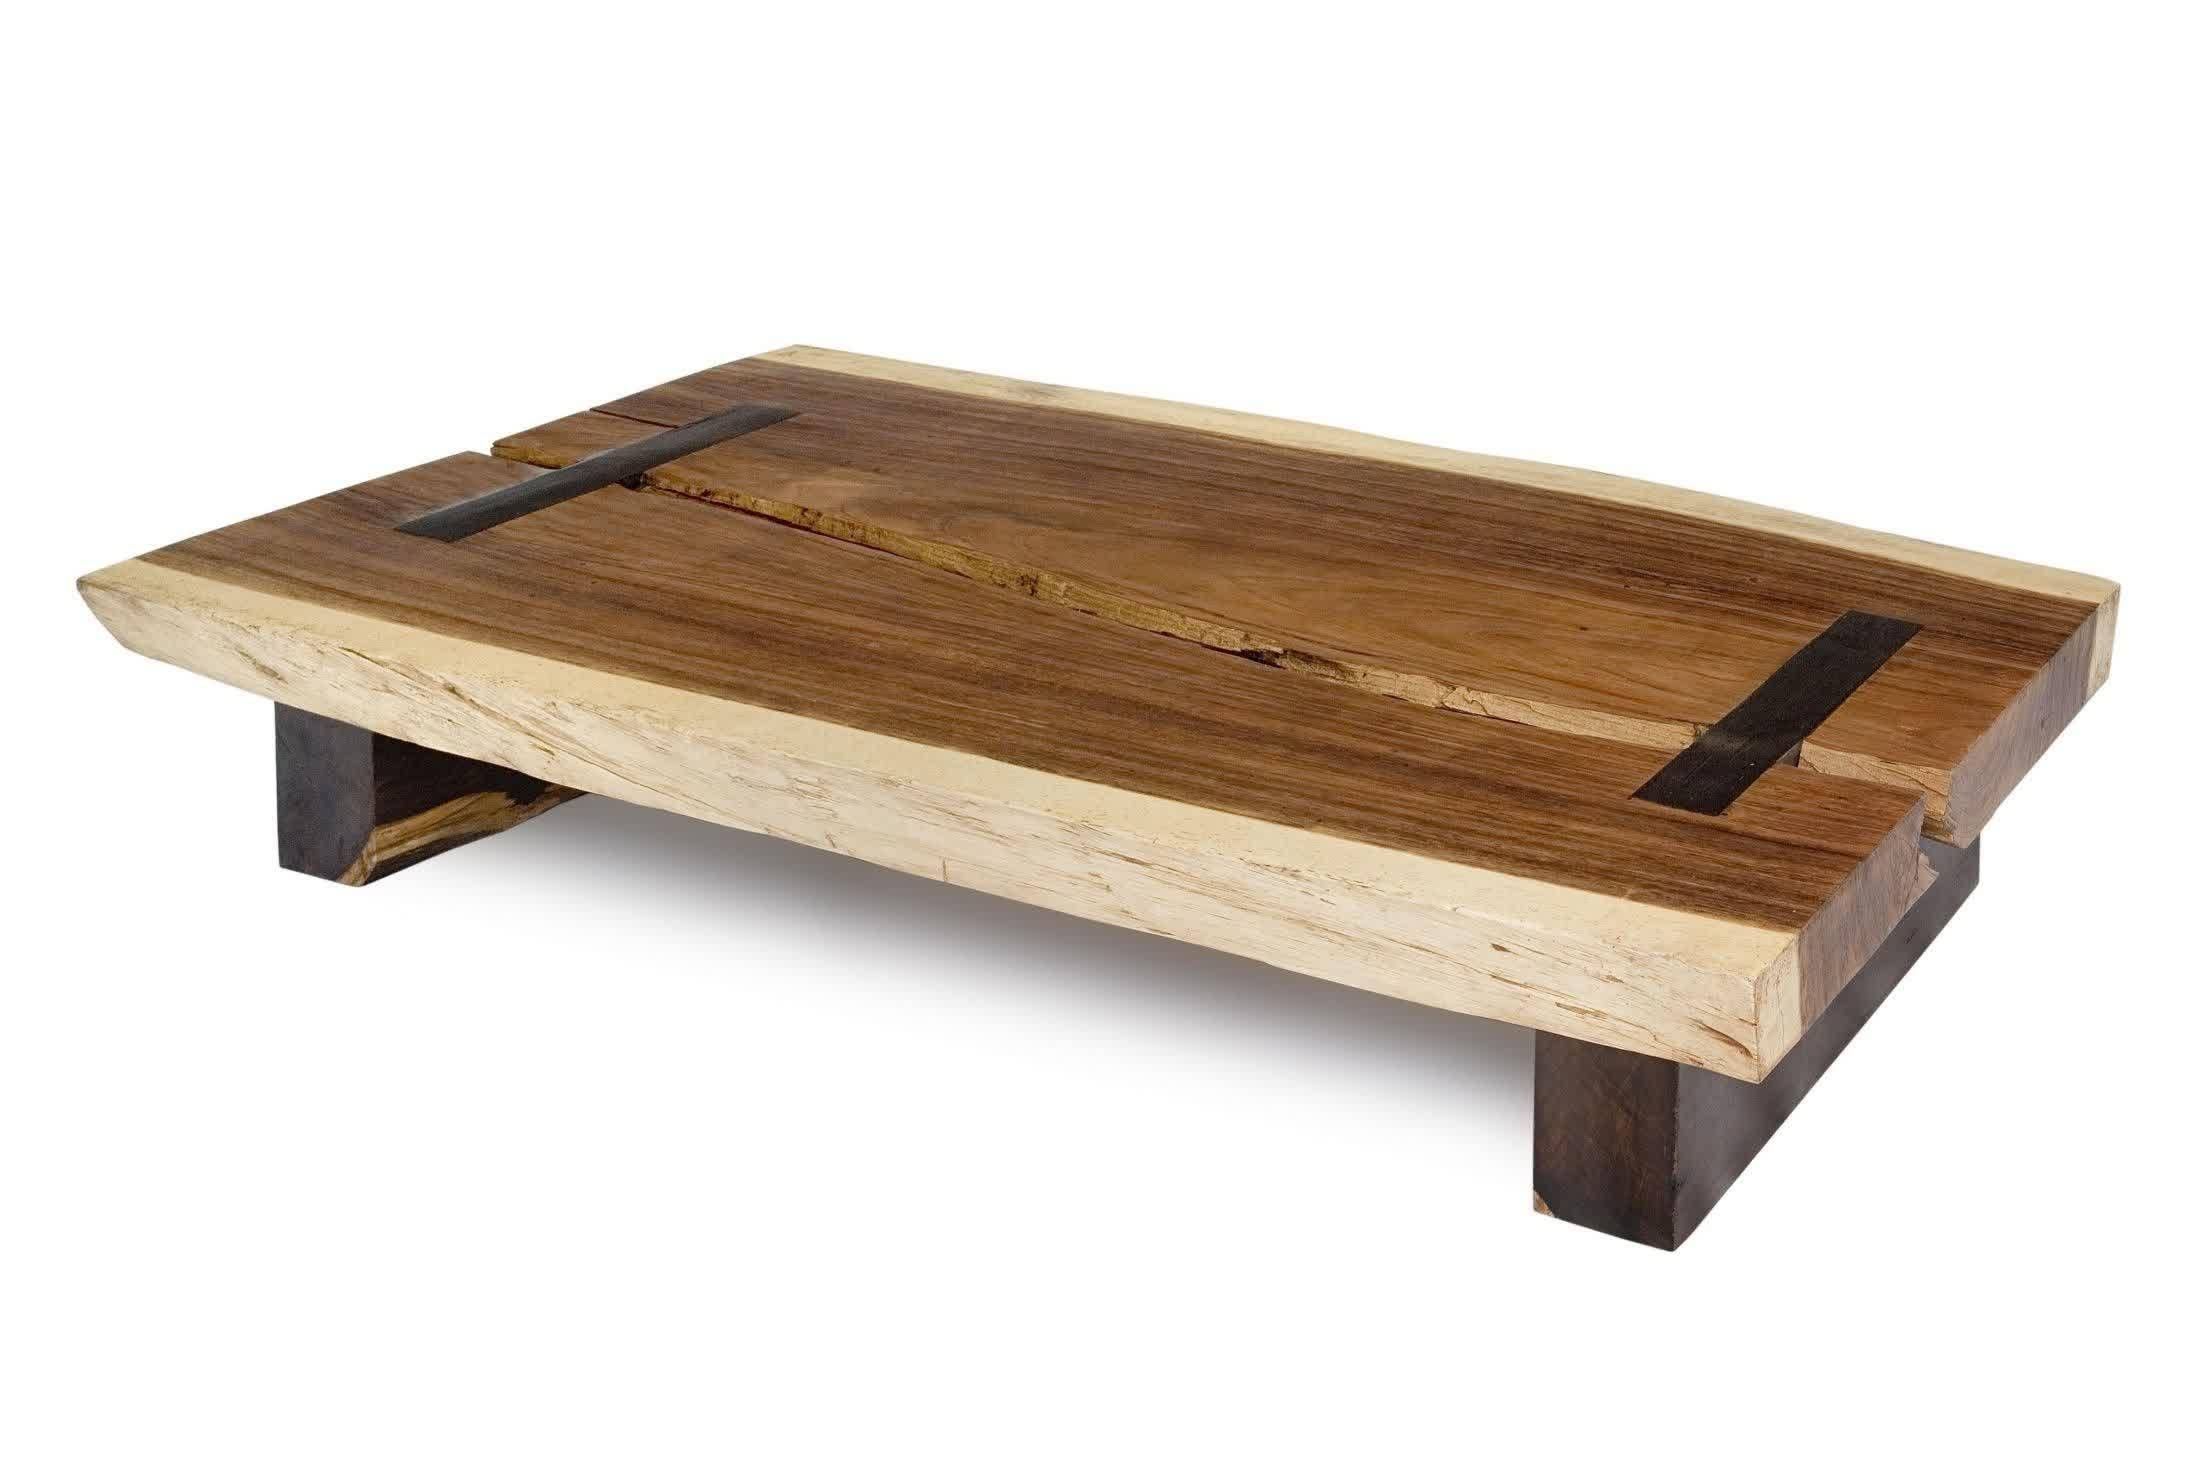 Perfect Low Coffee Table – Low Coffee Table Height, Low Level Pertaining To Large Low Rustic Coffee Tables (View 1 of 30)